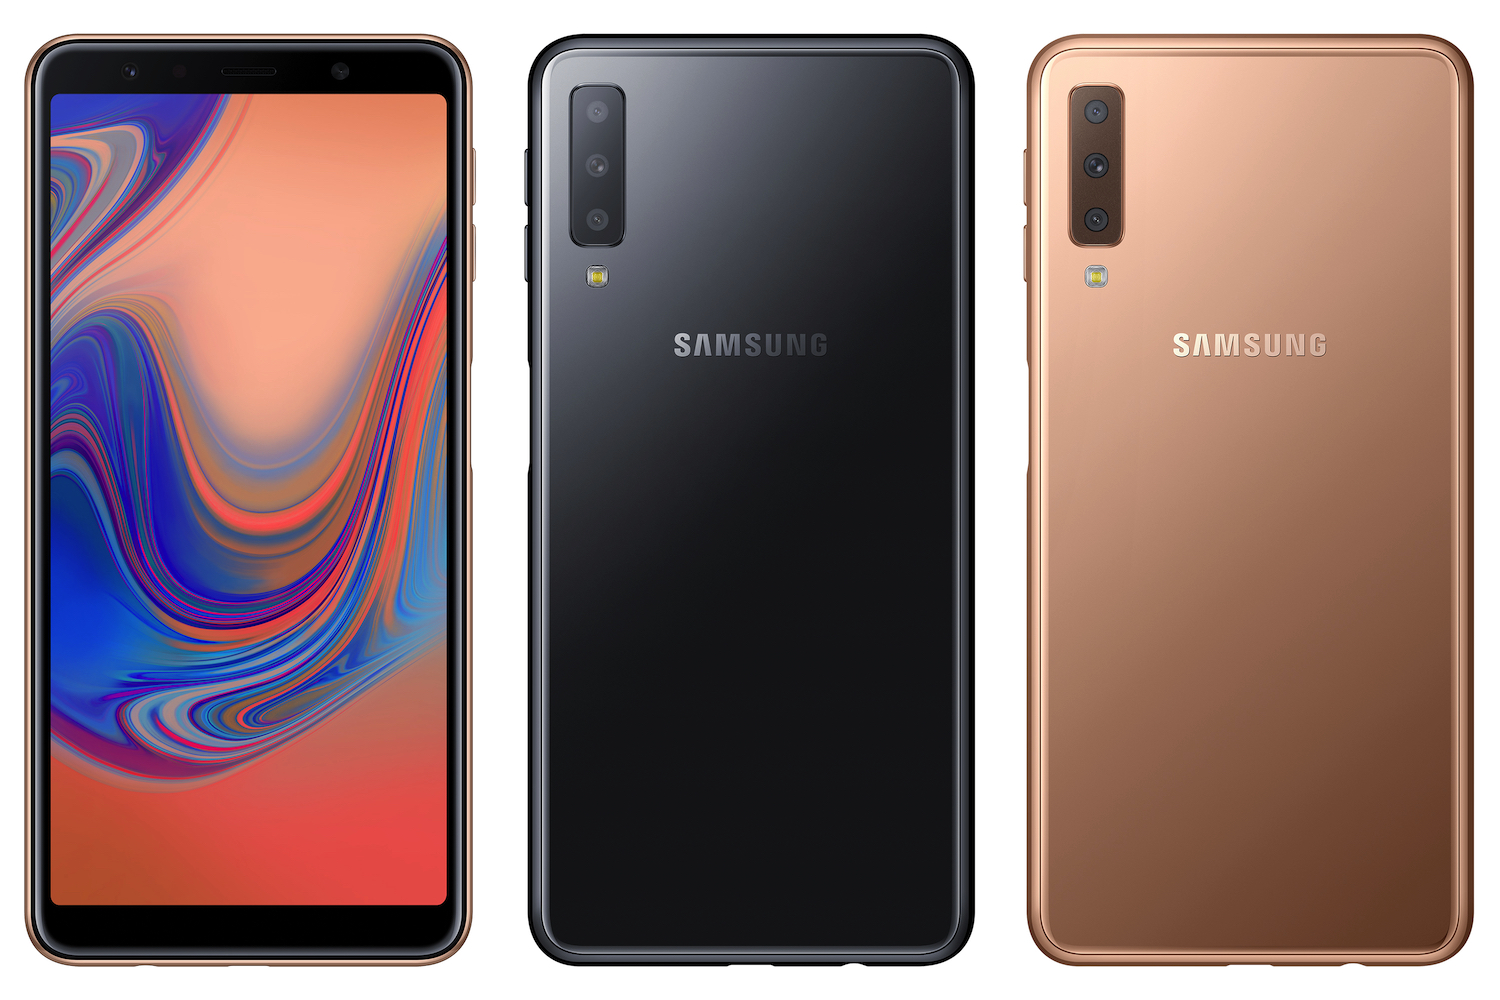 Samsung Looks to Huawei for Inspiration, and the New Galaxy A7 Is